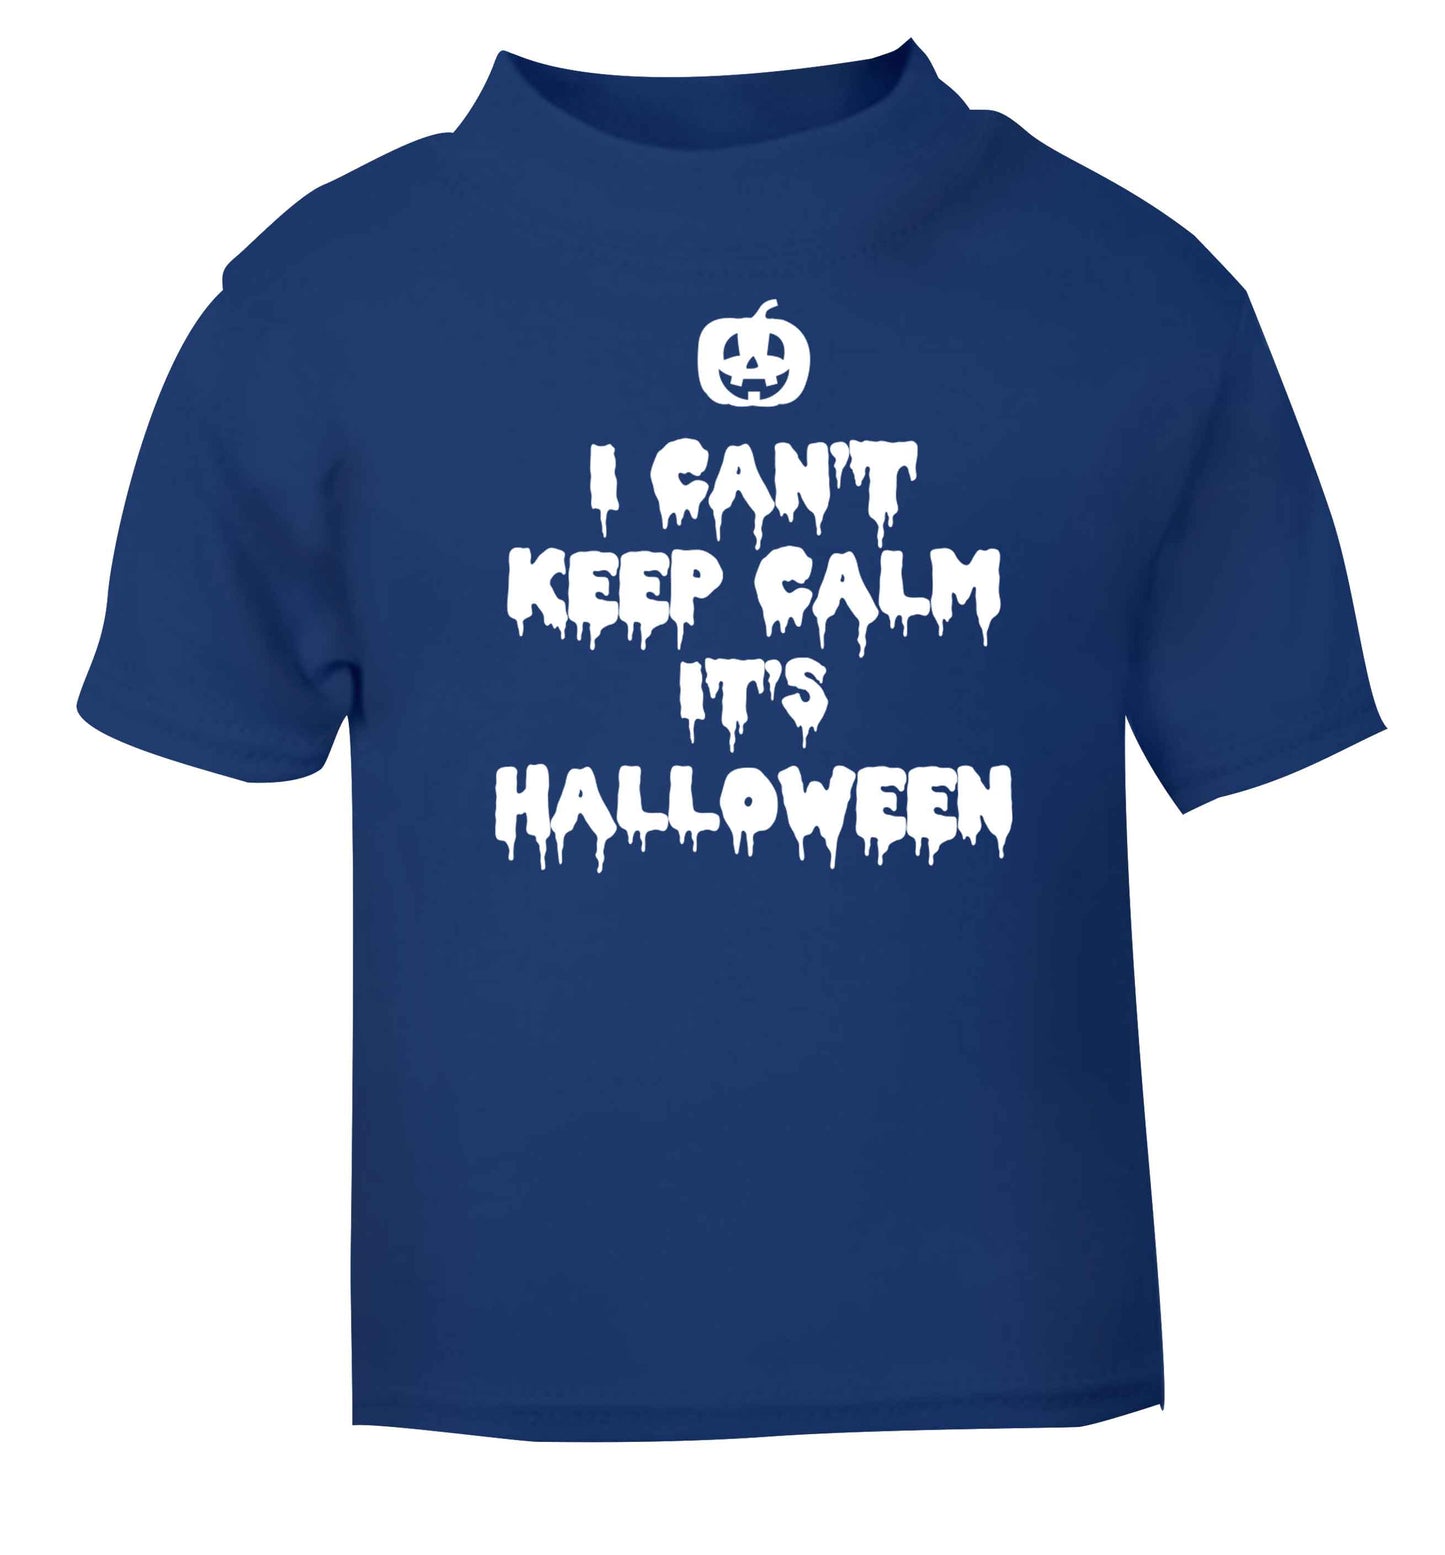 I can't keep calm it's halloween blue baby toddler Tshirt 2 Years